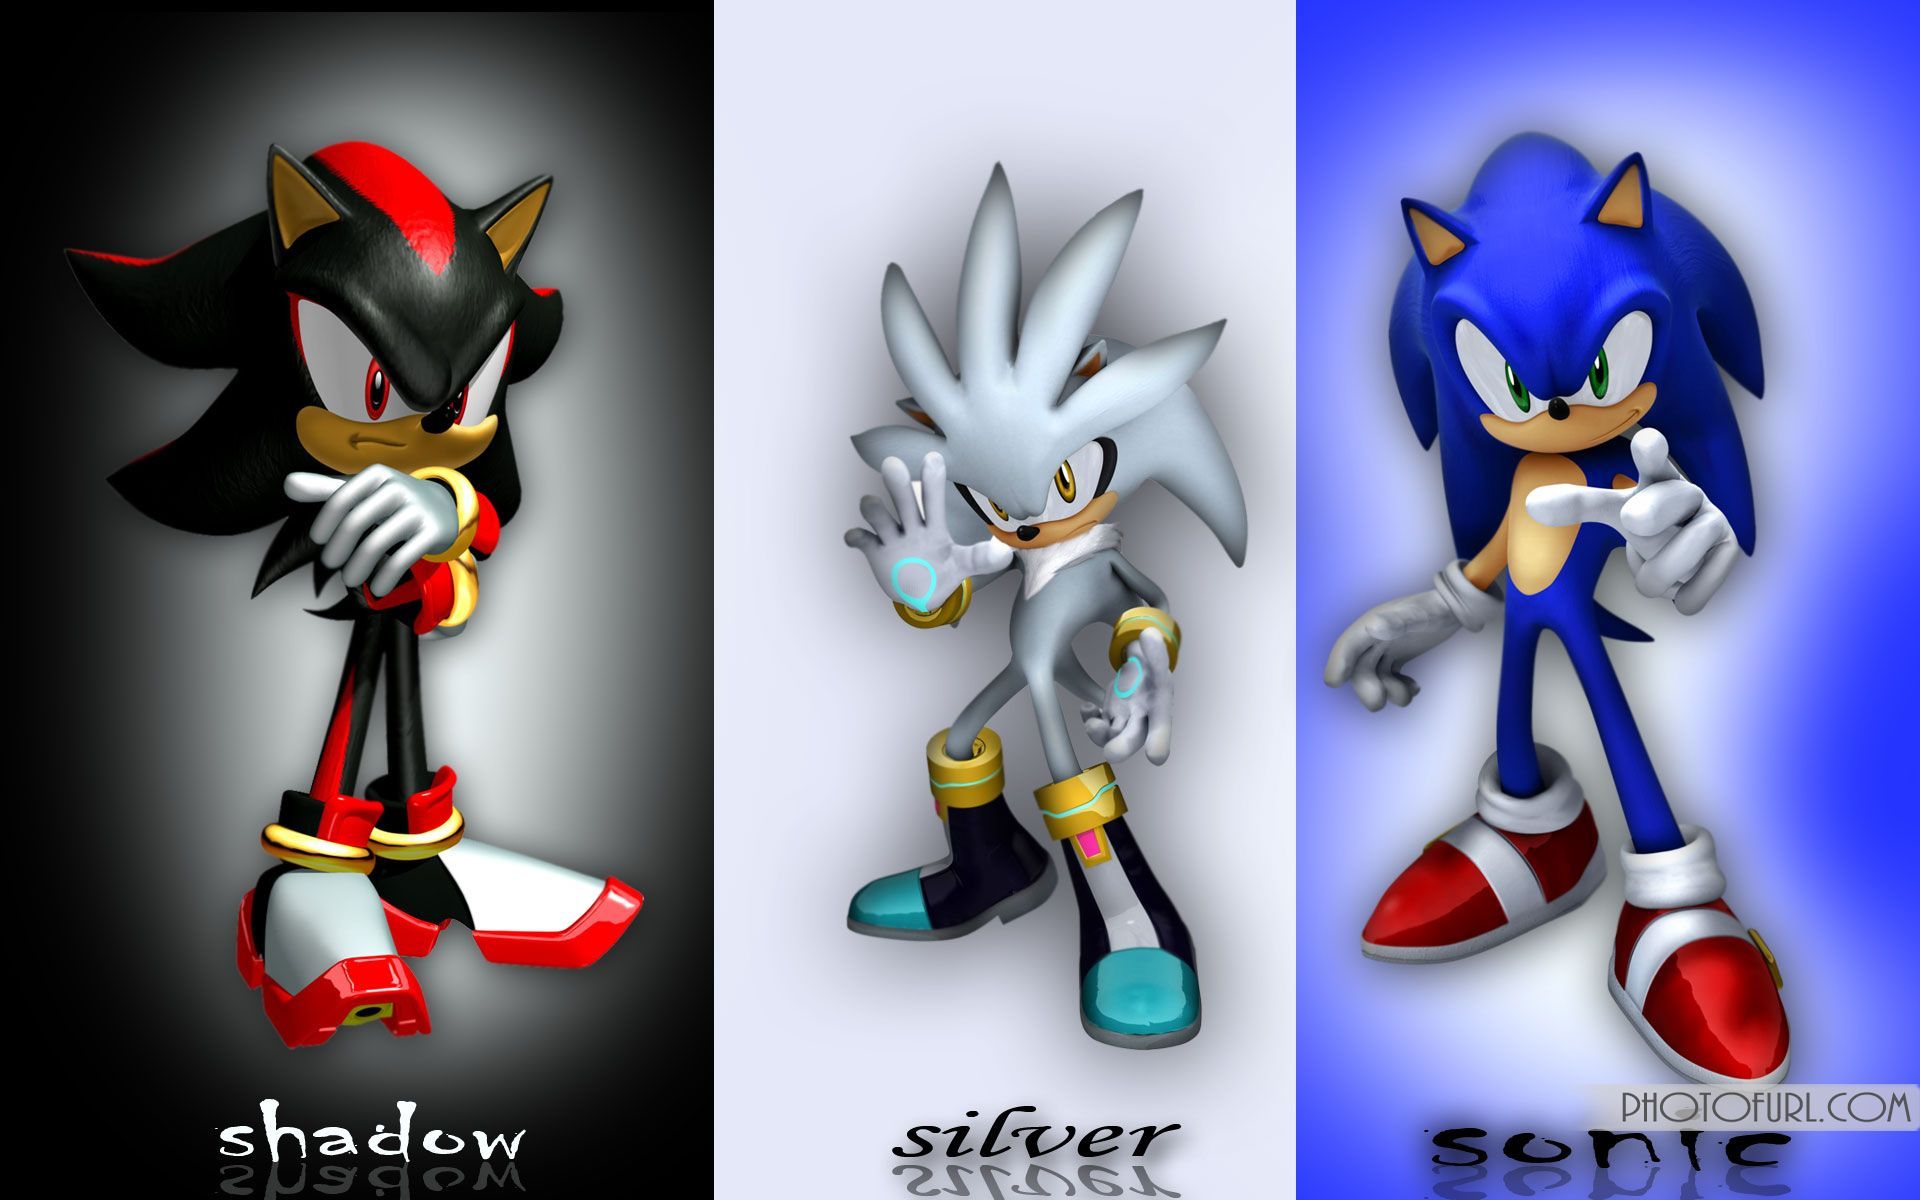 sonic heroes picture to print. Cartoon games wallpaper / Comic